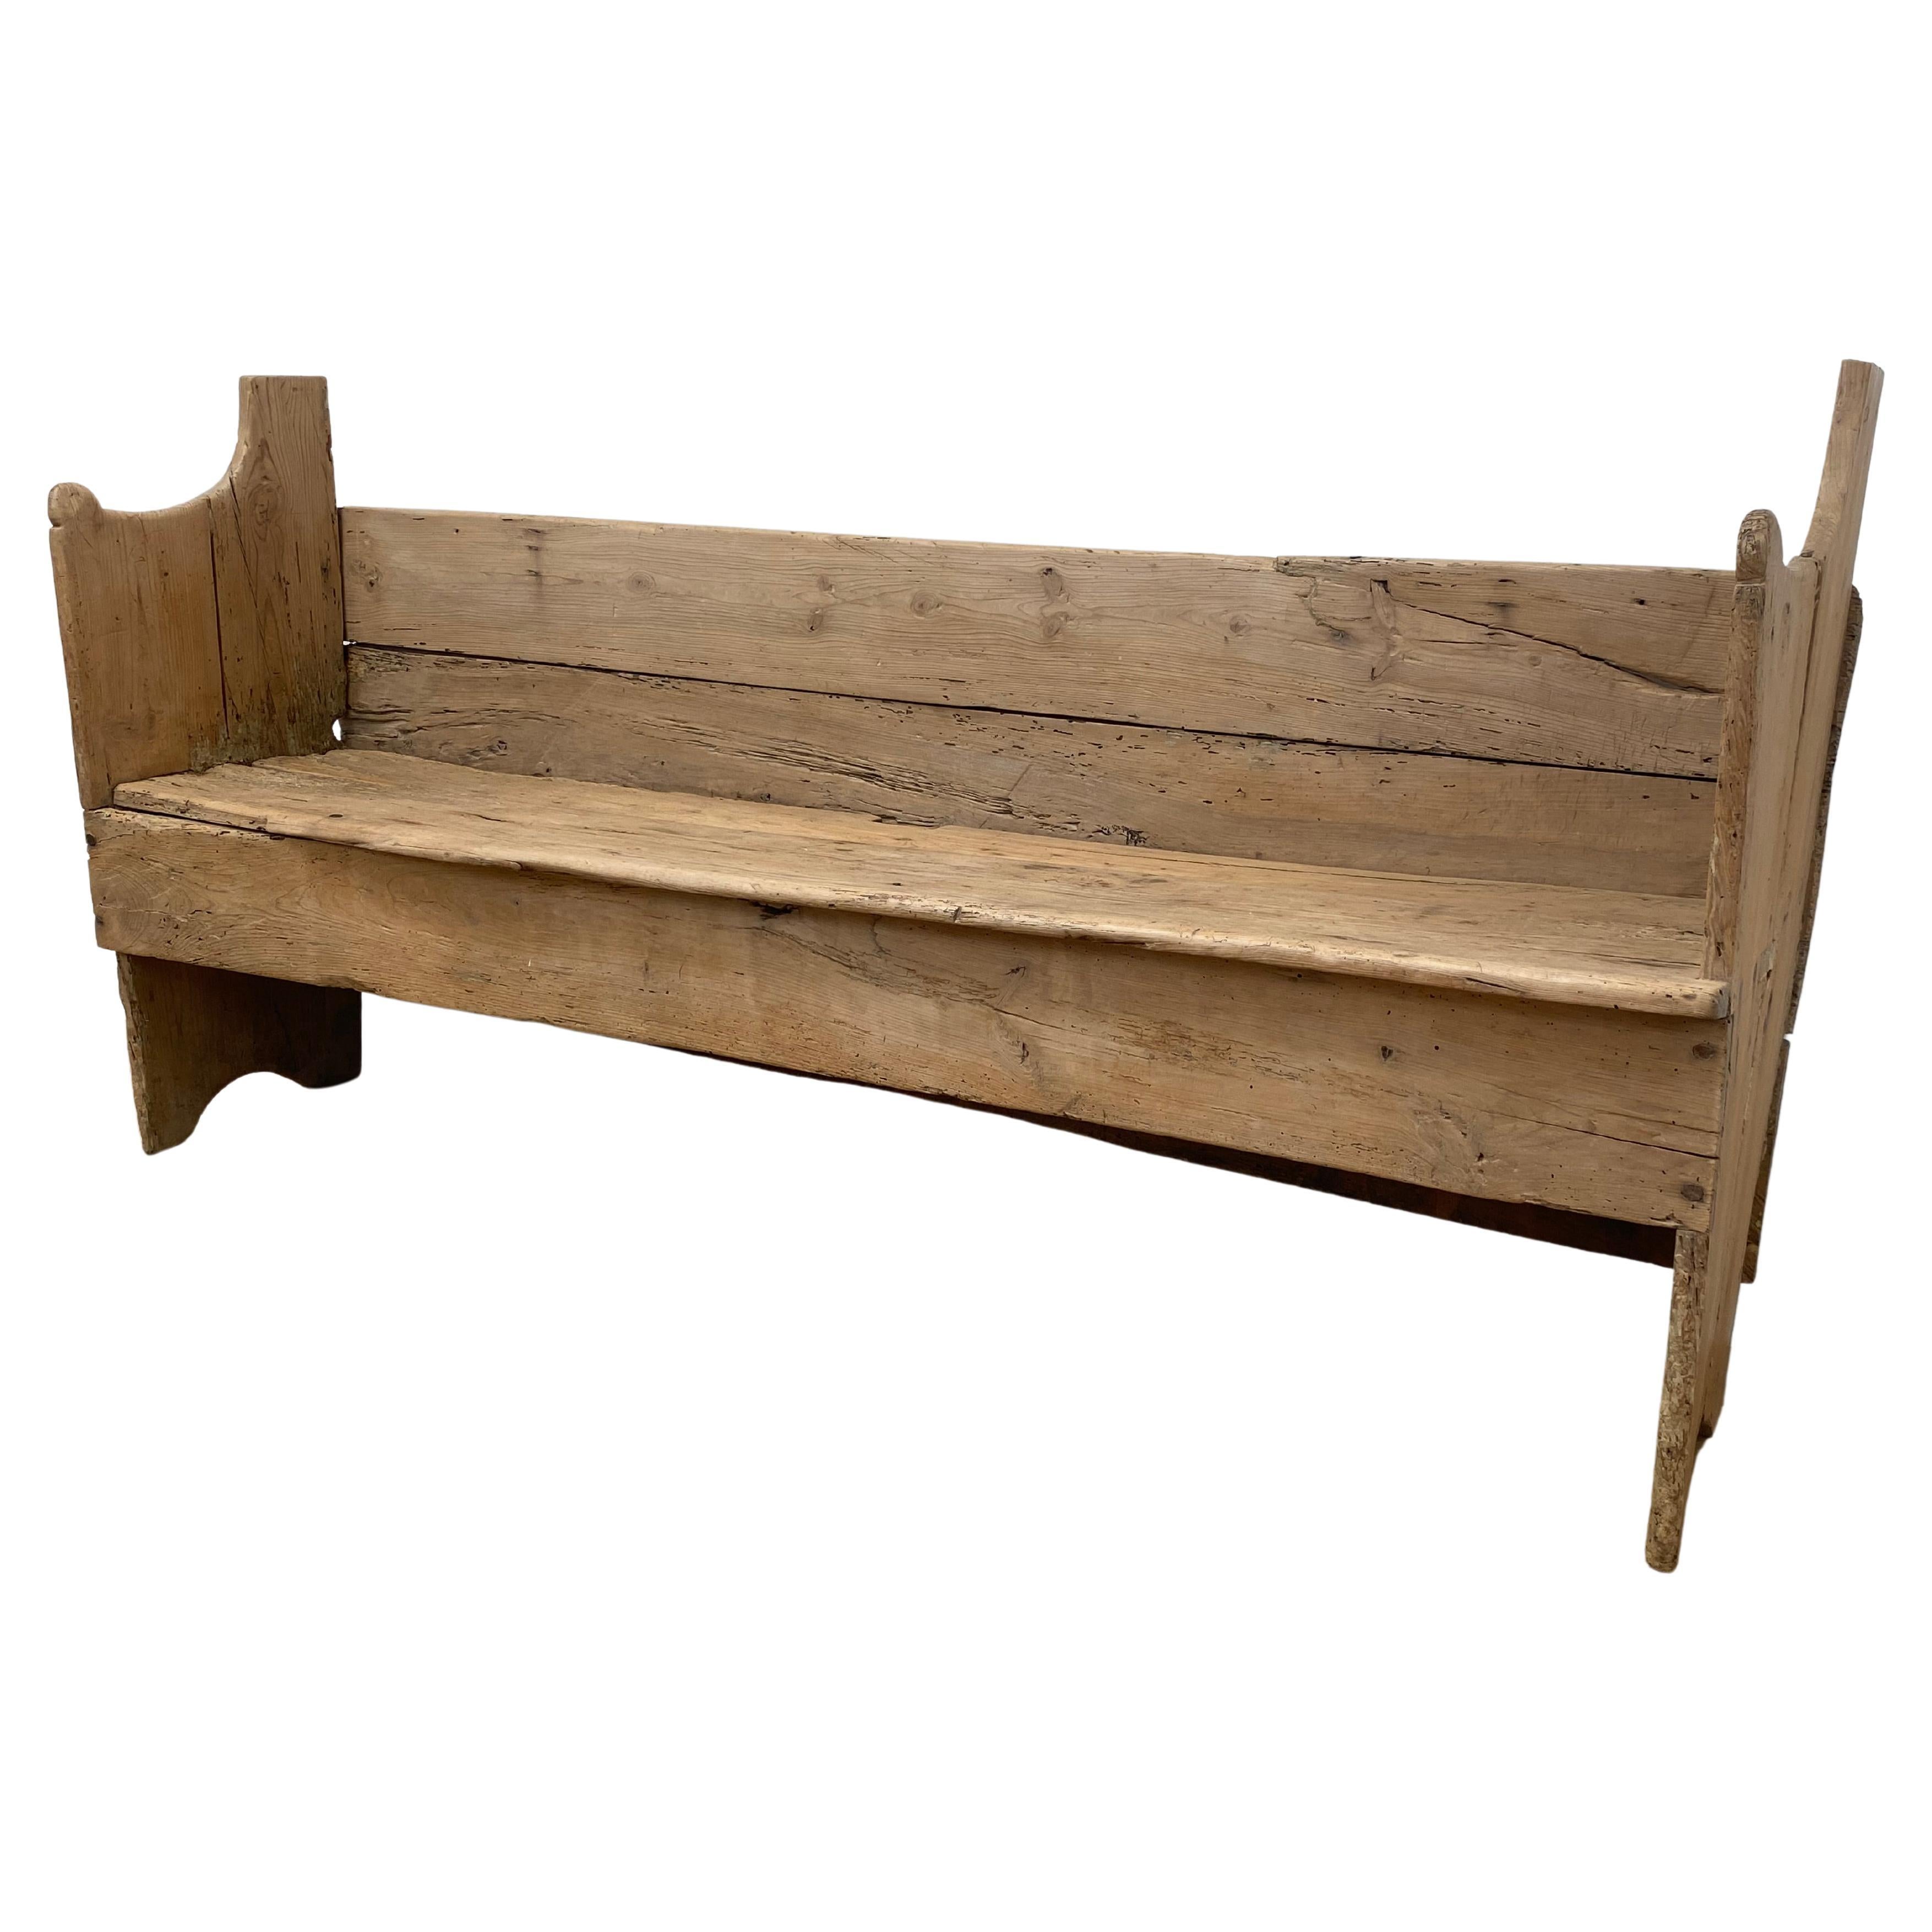 Rustic Antique Spanish Bench in a Bleached Wood